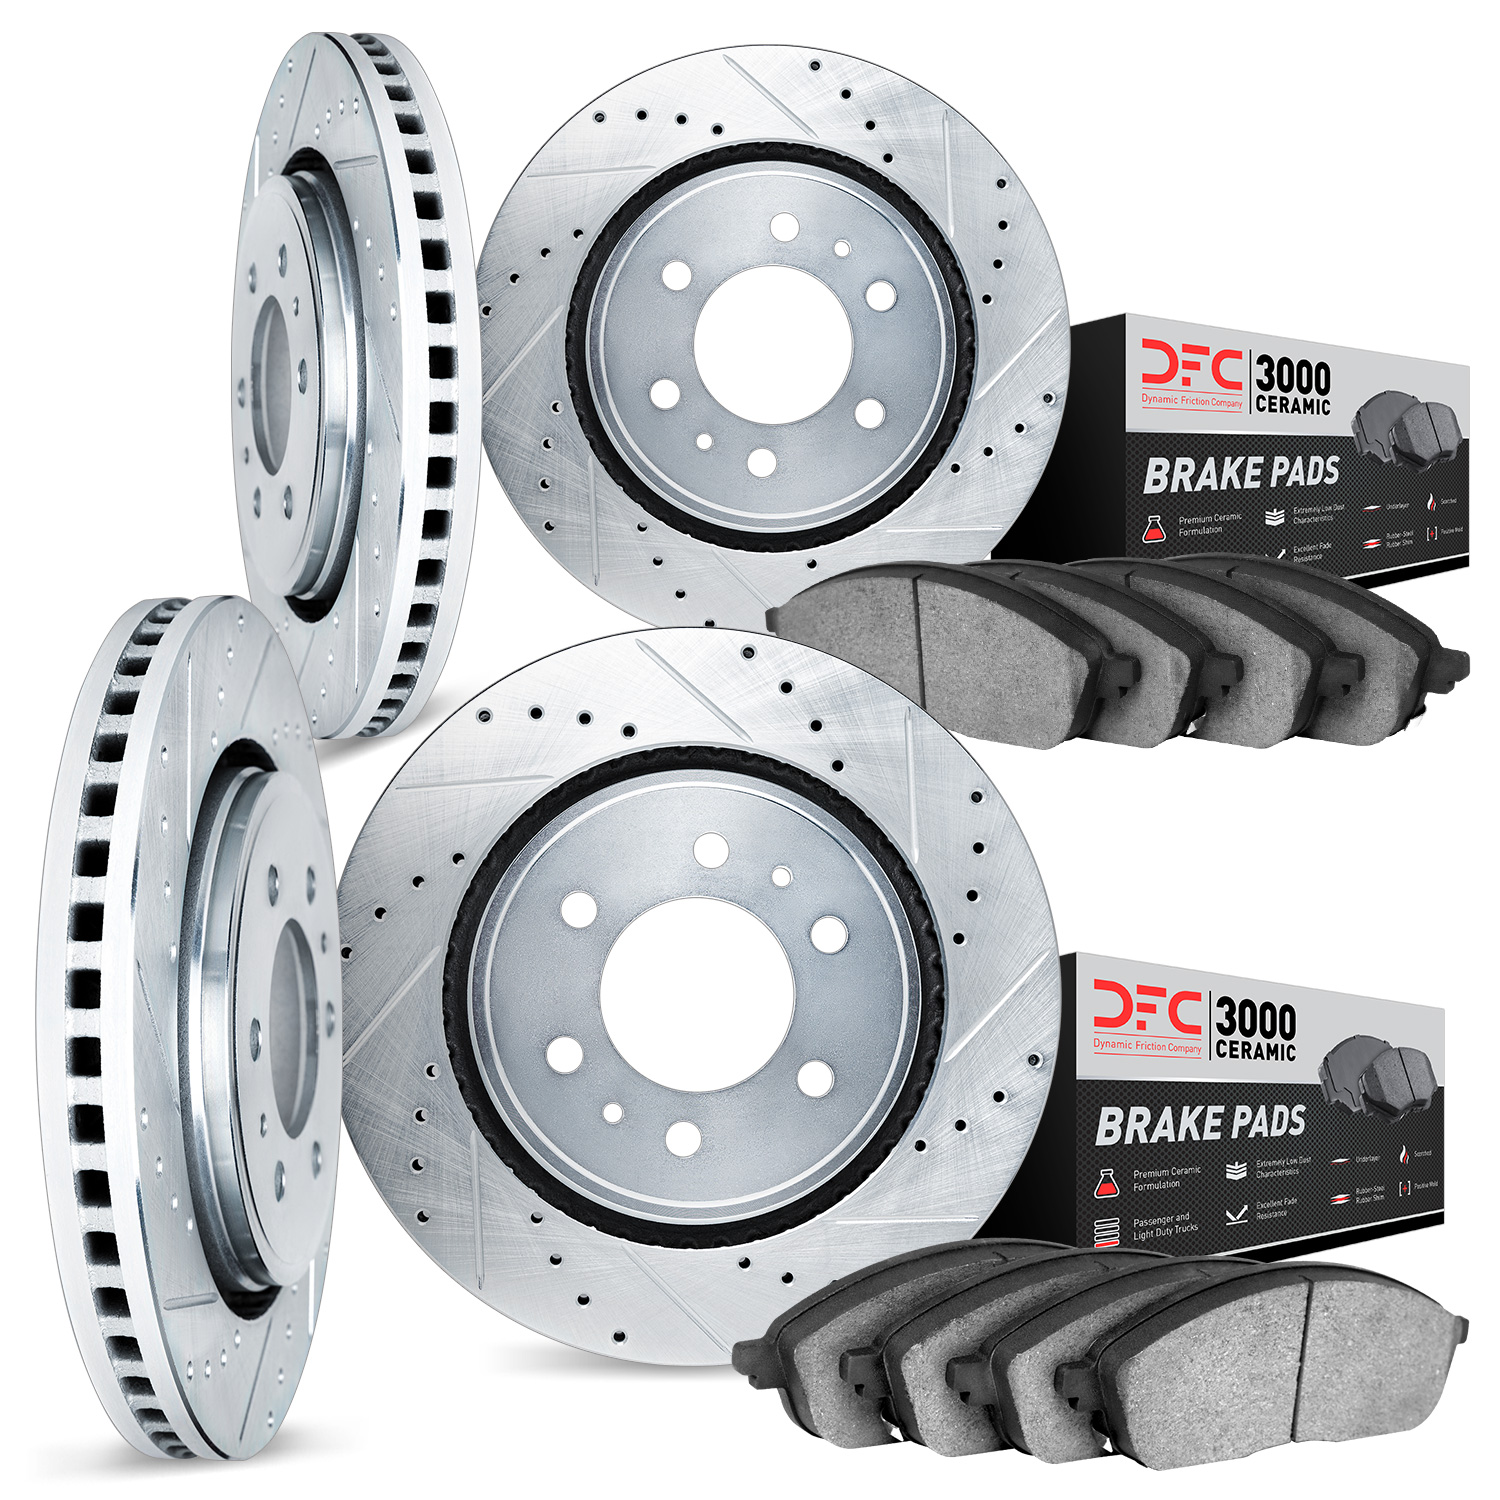 7304-54060 Drilled/Slotted Brake Rotor with 3000-Series Ceramic Brake Pads Kit [Silver], 2002-2006 Ford/Lincoln/Mercury/Mazda, P